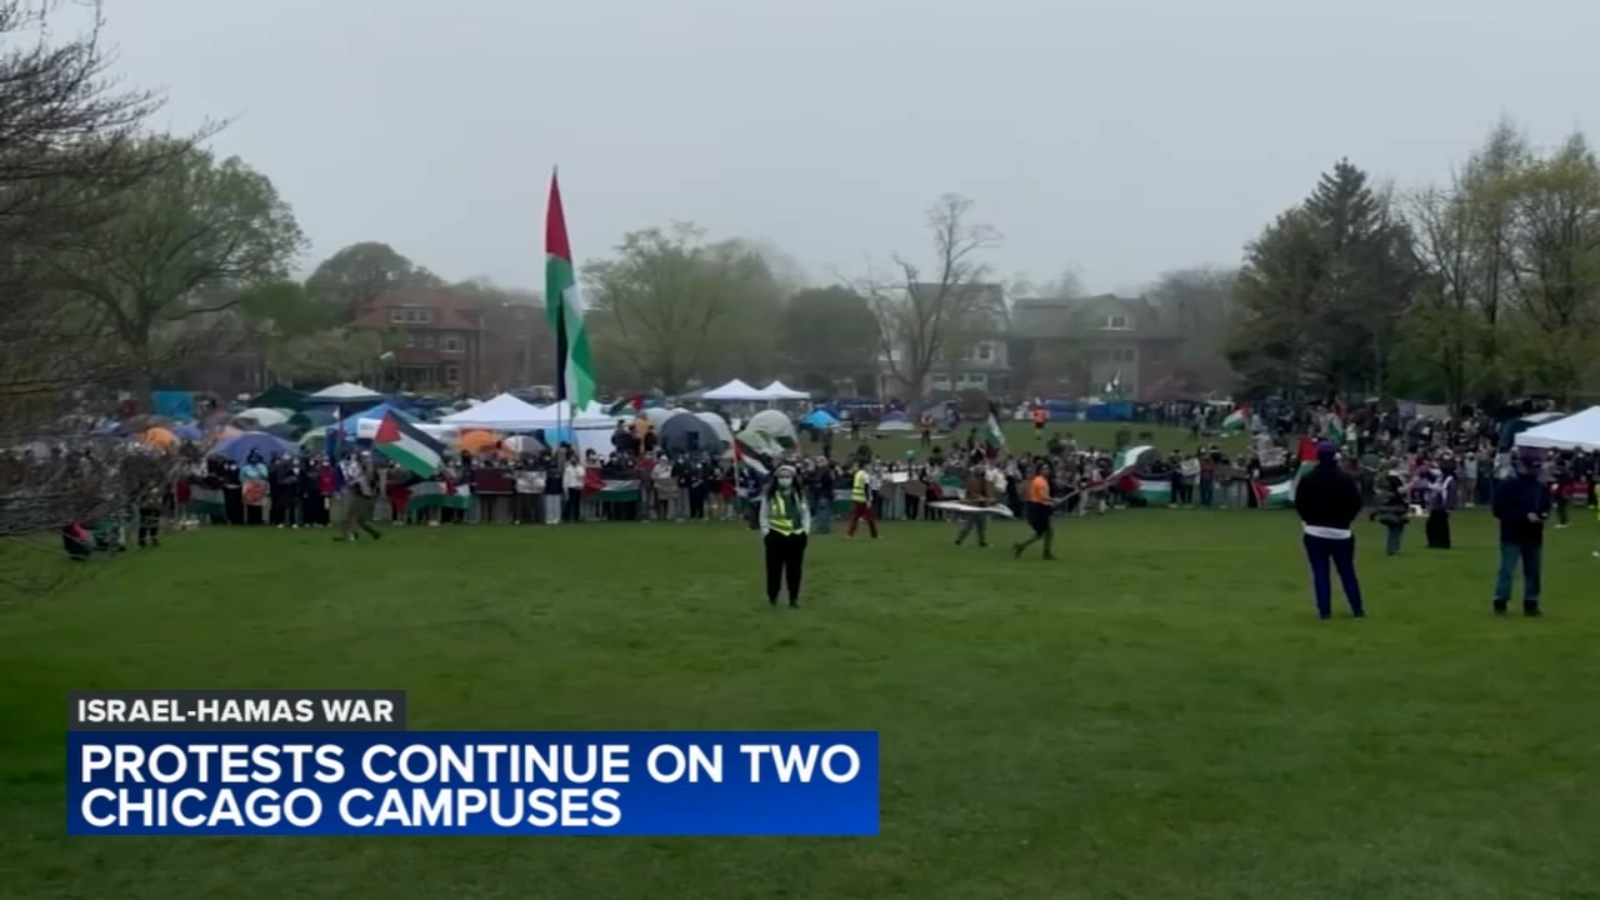 Student protest today: Chicago-area organizers push back against accusations of antisemitism at Northwestern; Biden speaks out [Video]